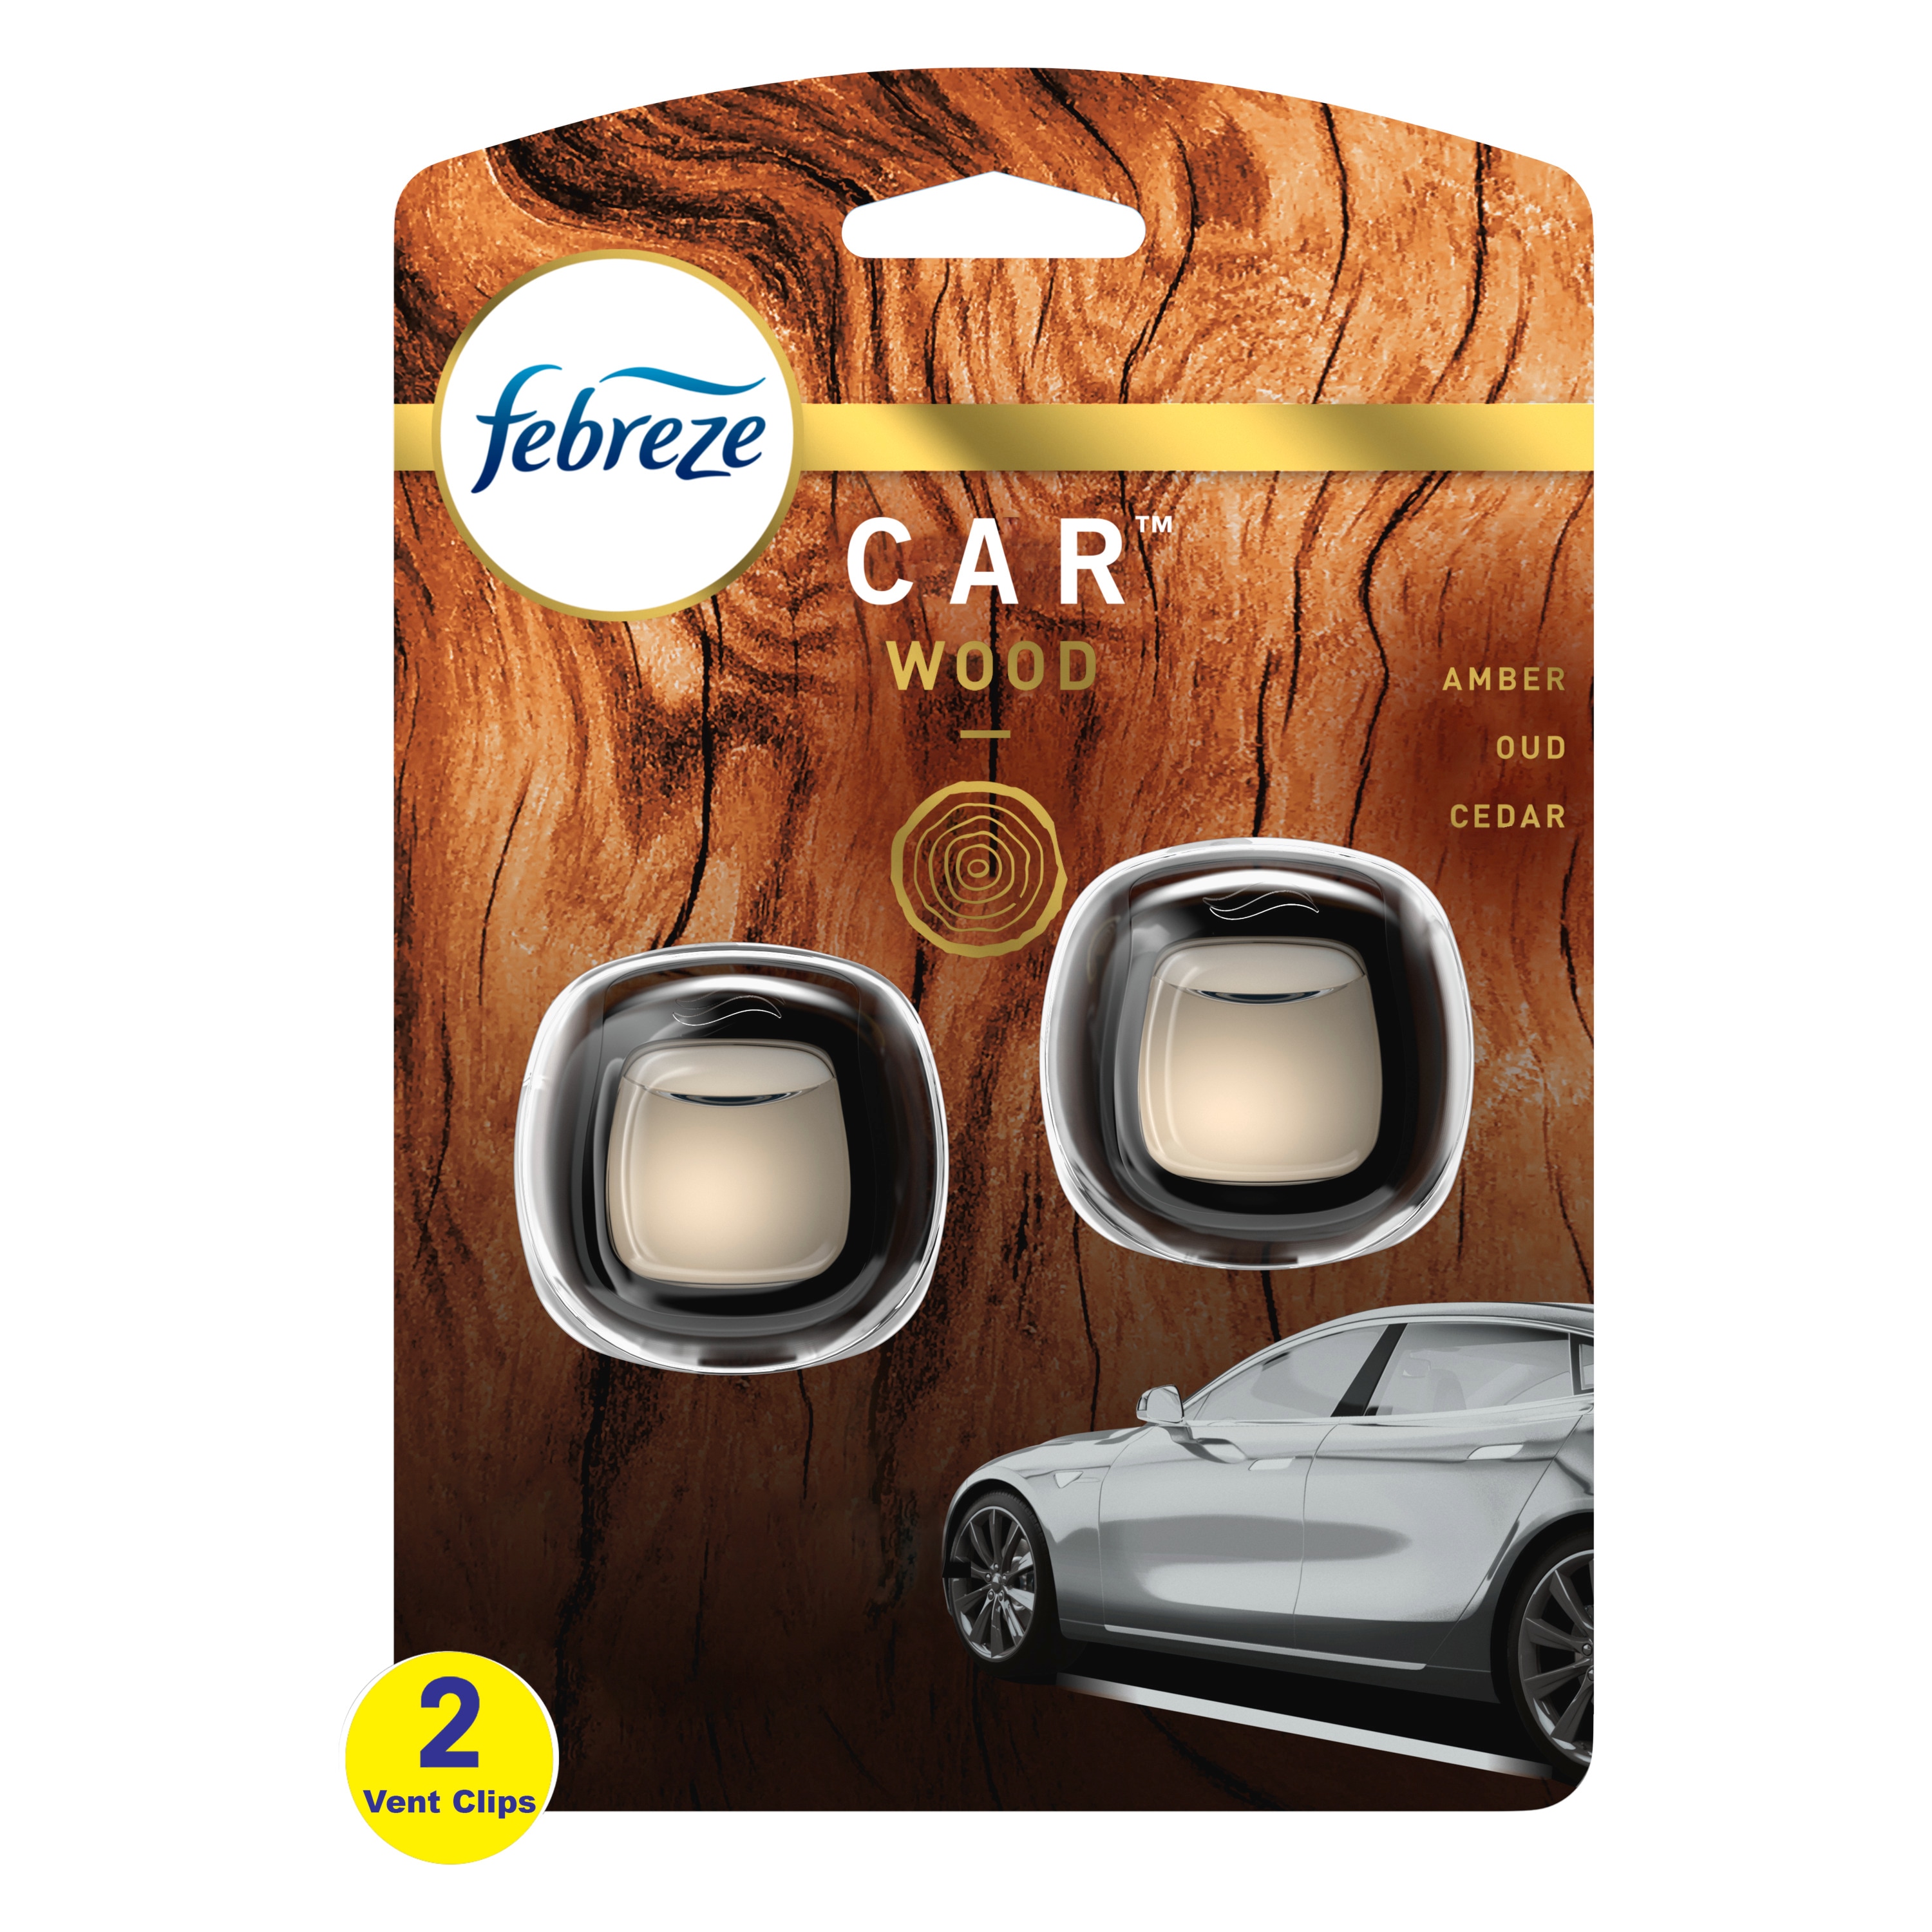 Peppermint Scent Wooden Reusable Car Air Freshener, Buy Today